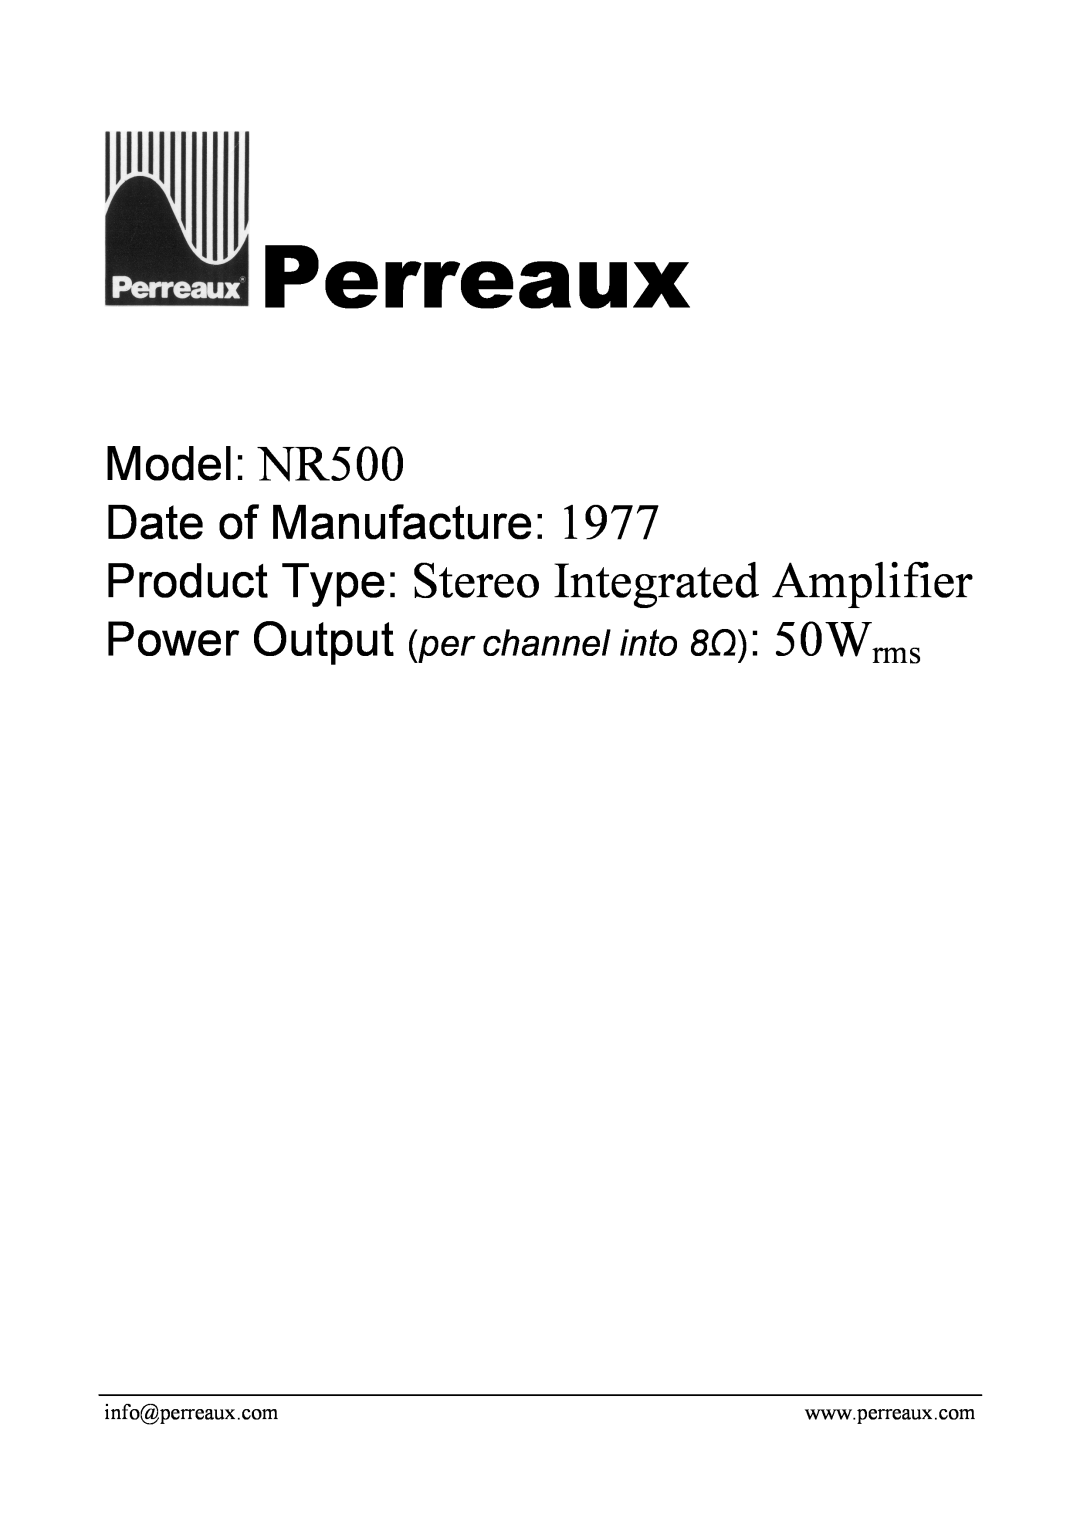 Perreaux manual Perreaux, Product Type Stereo Integrated Amplifier, Model NR500 Date of Manufacture 